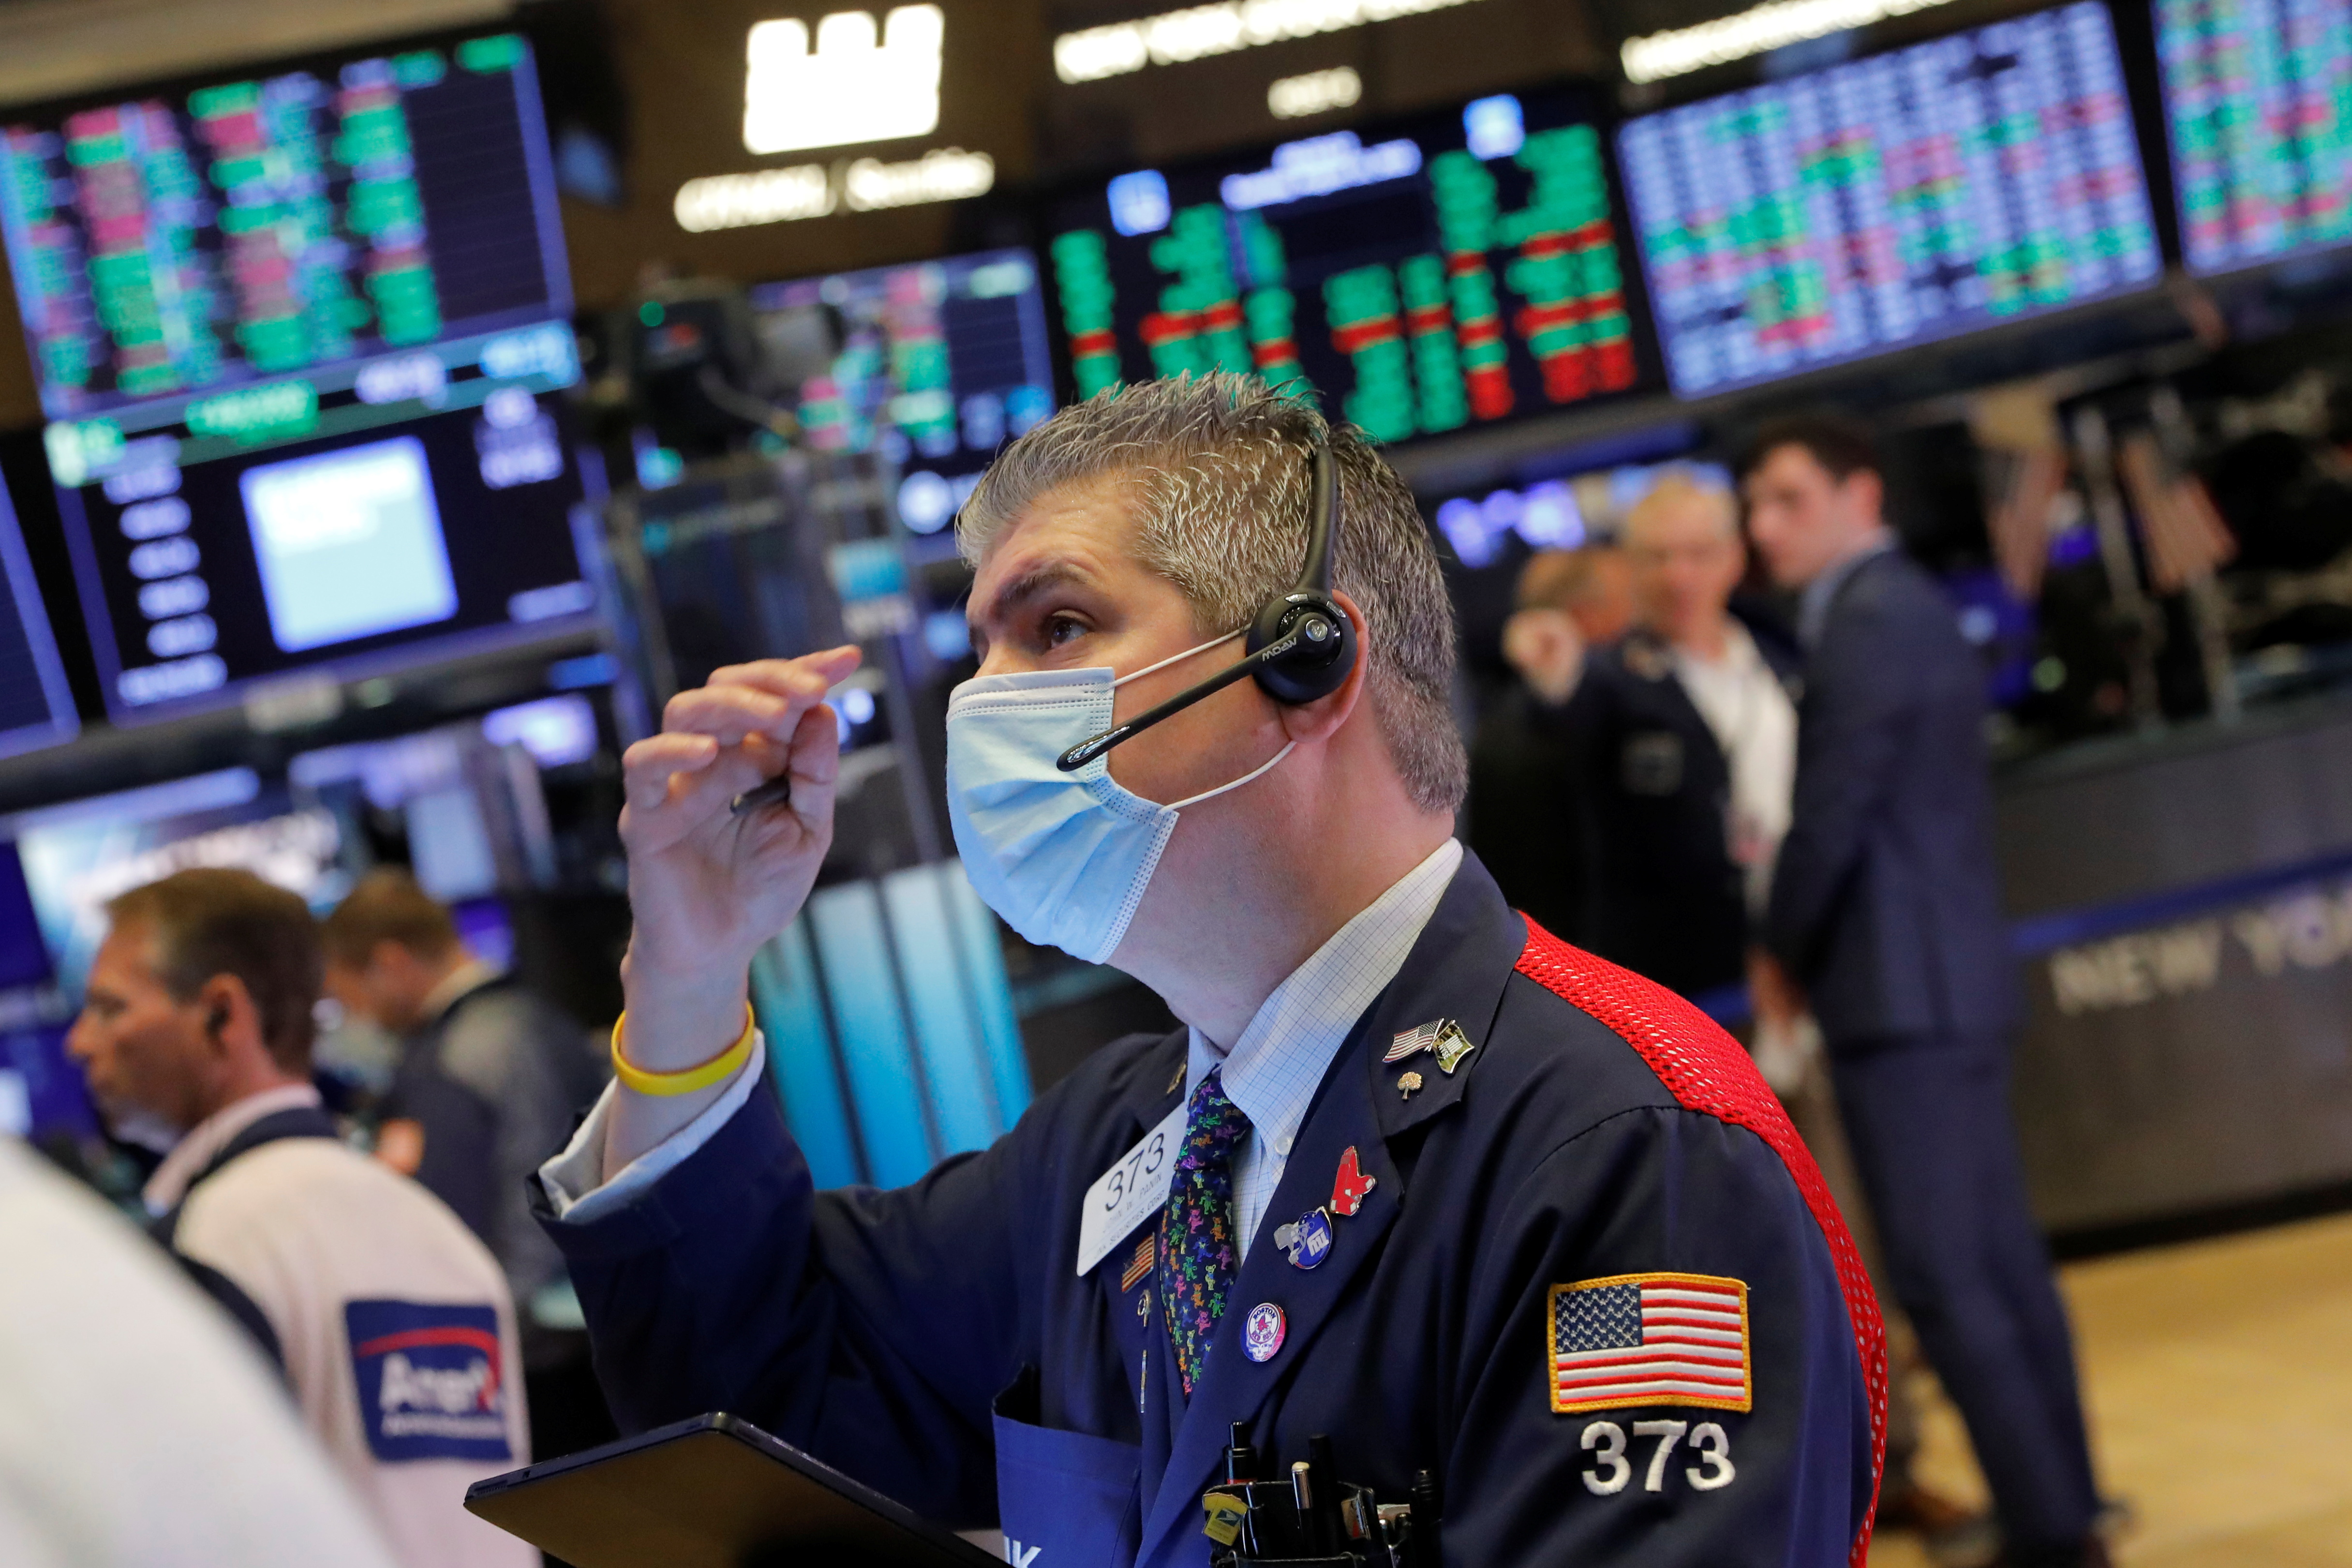 A trader works on the trading floor at the New York Stock Exchange (NYSE) in Manhattan, New York City, U.S., August 10, 2021. REUTERS/Andrew Kelly